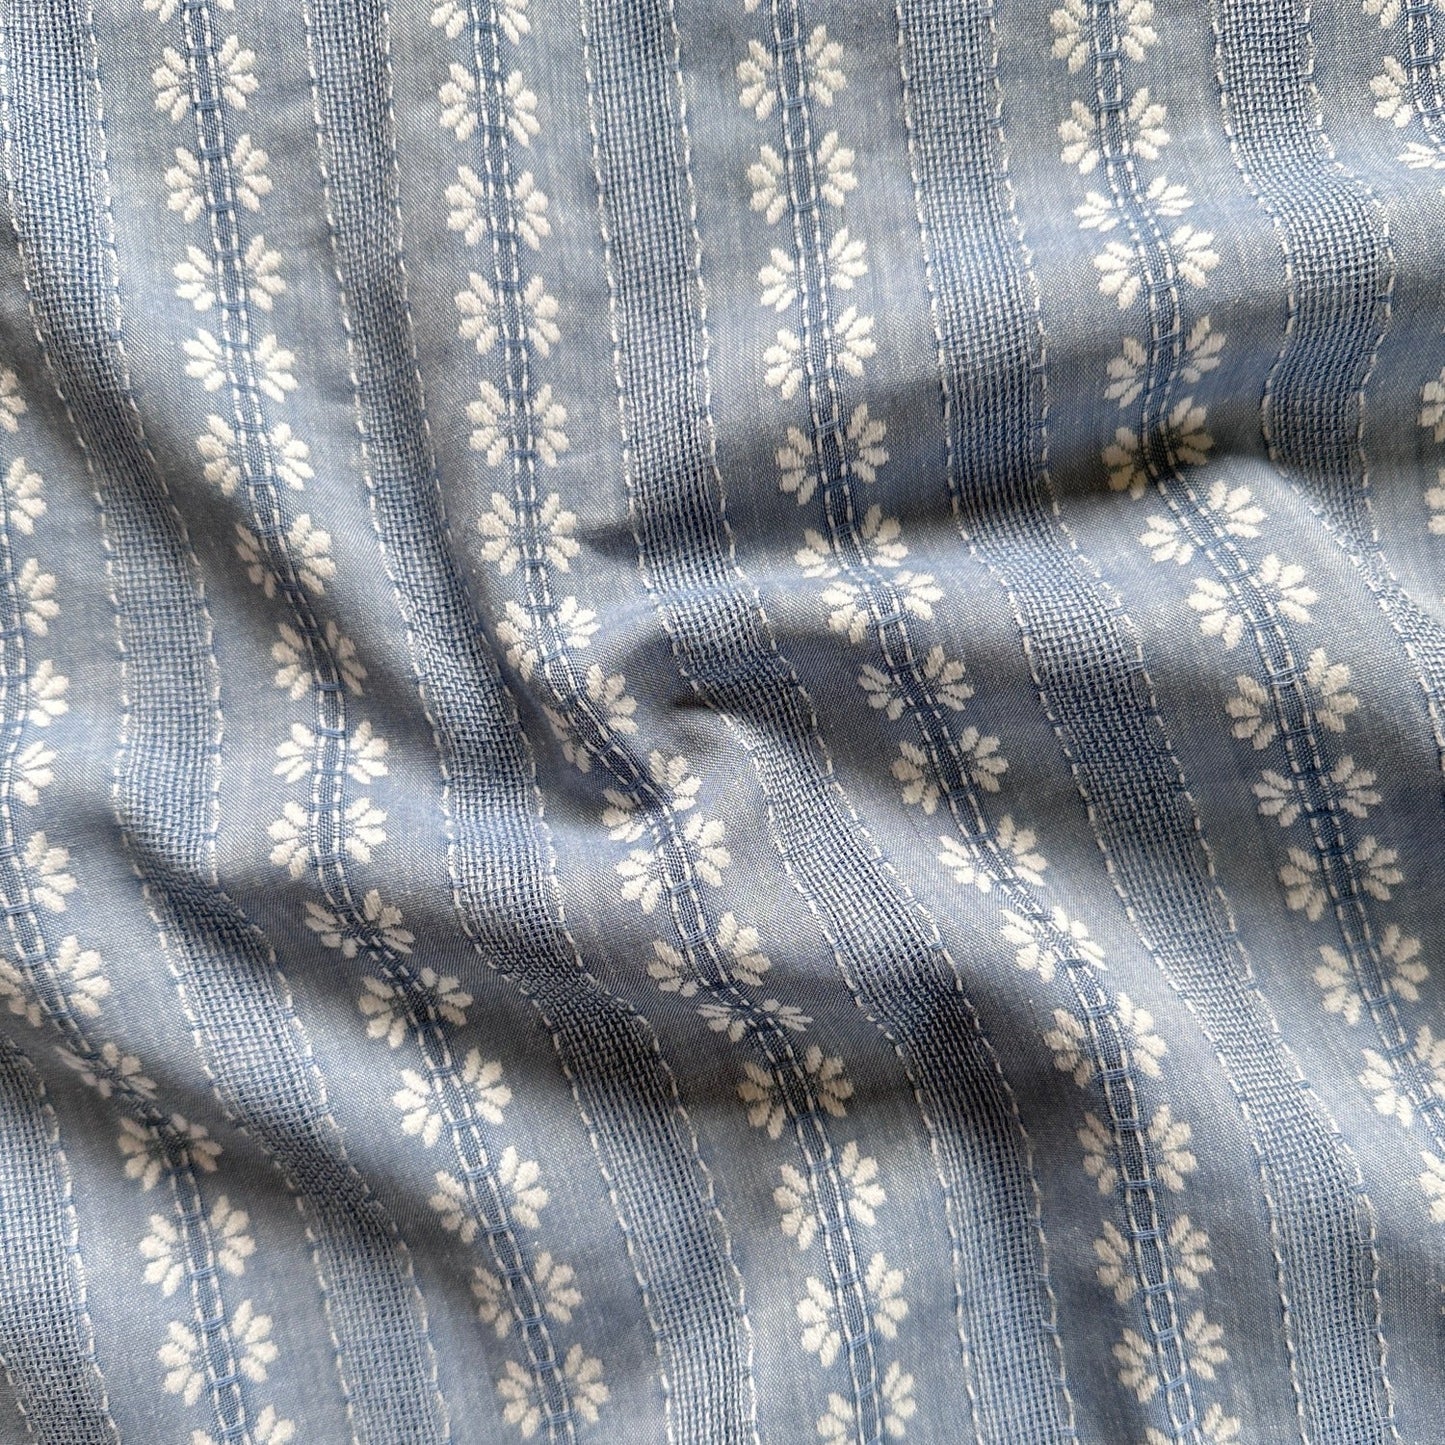 Embroidered Flowers Striped Cotton Rayon Fabric in Light Denim Blue - 1m